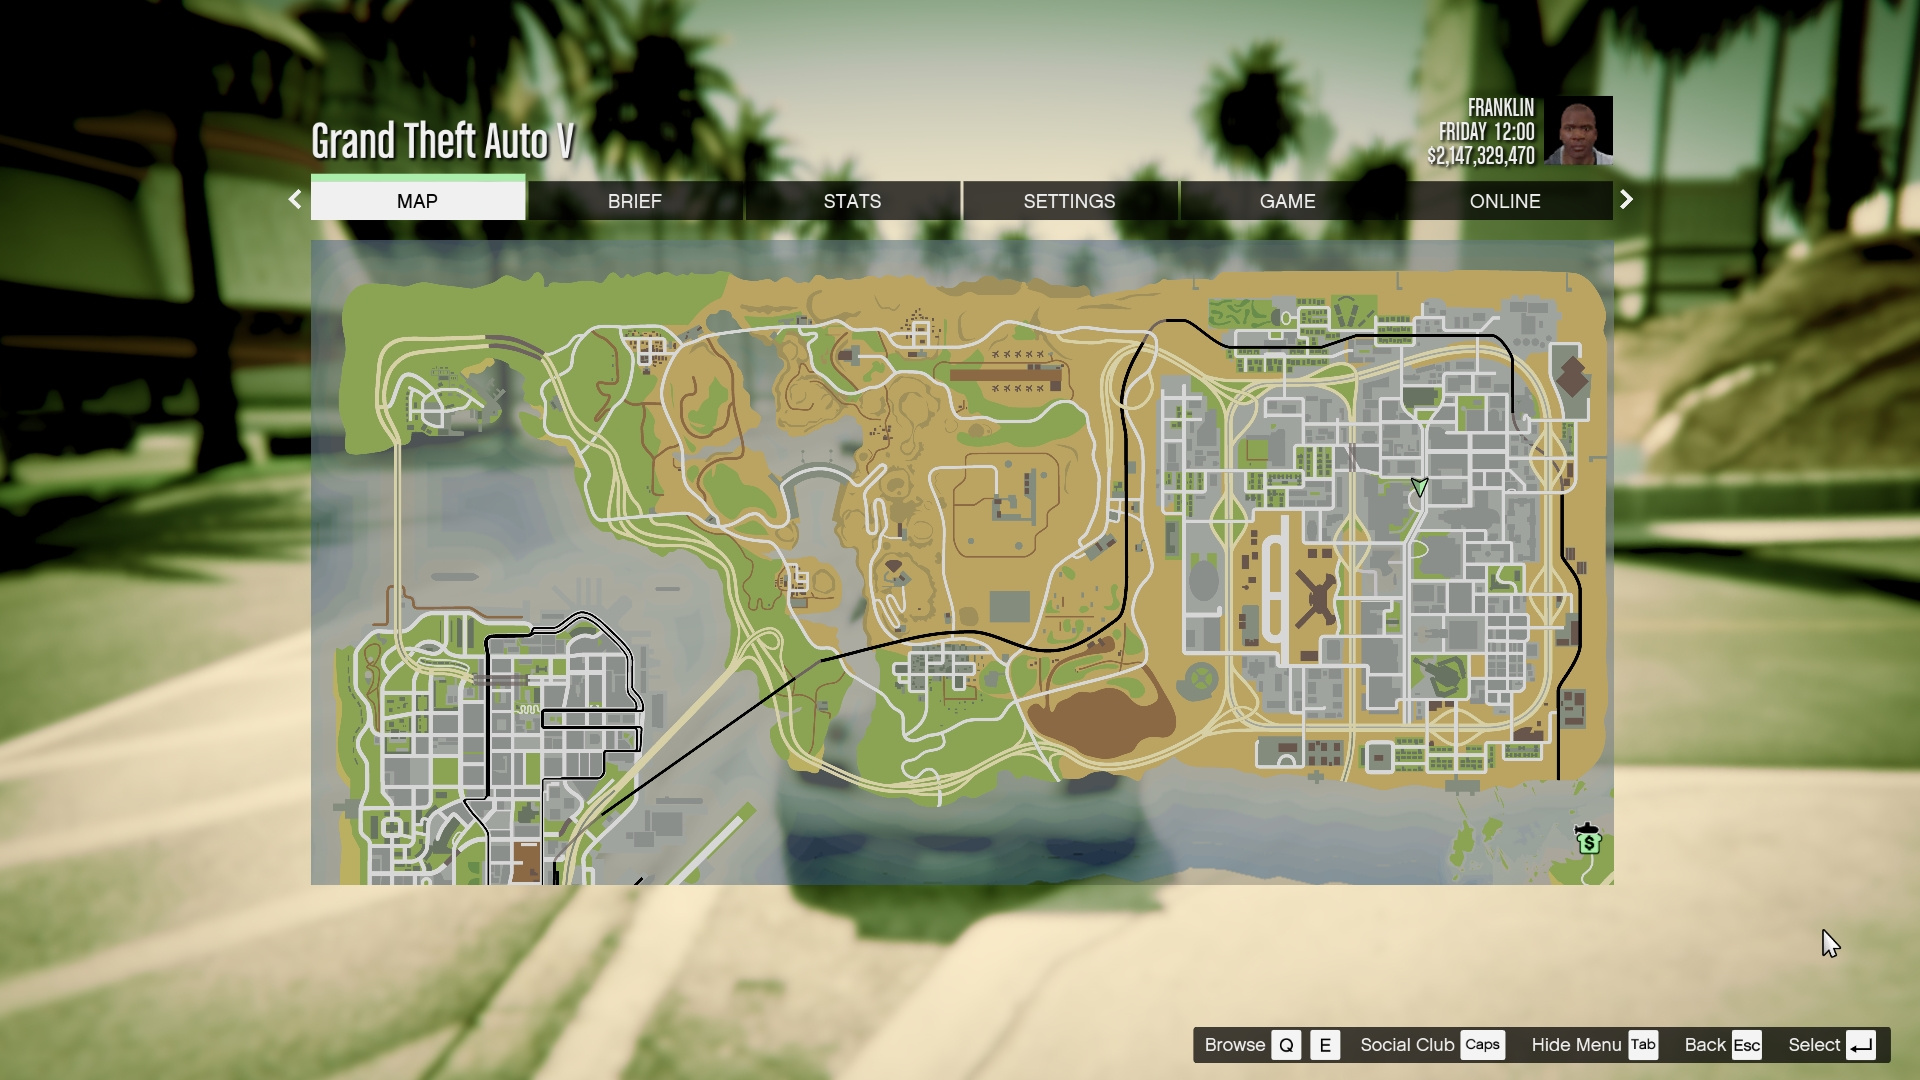 Gta V Map Compared To San Andreas